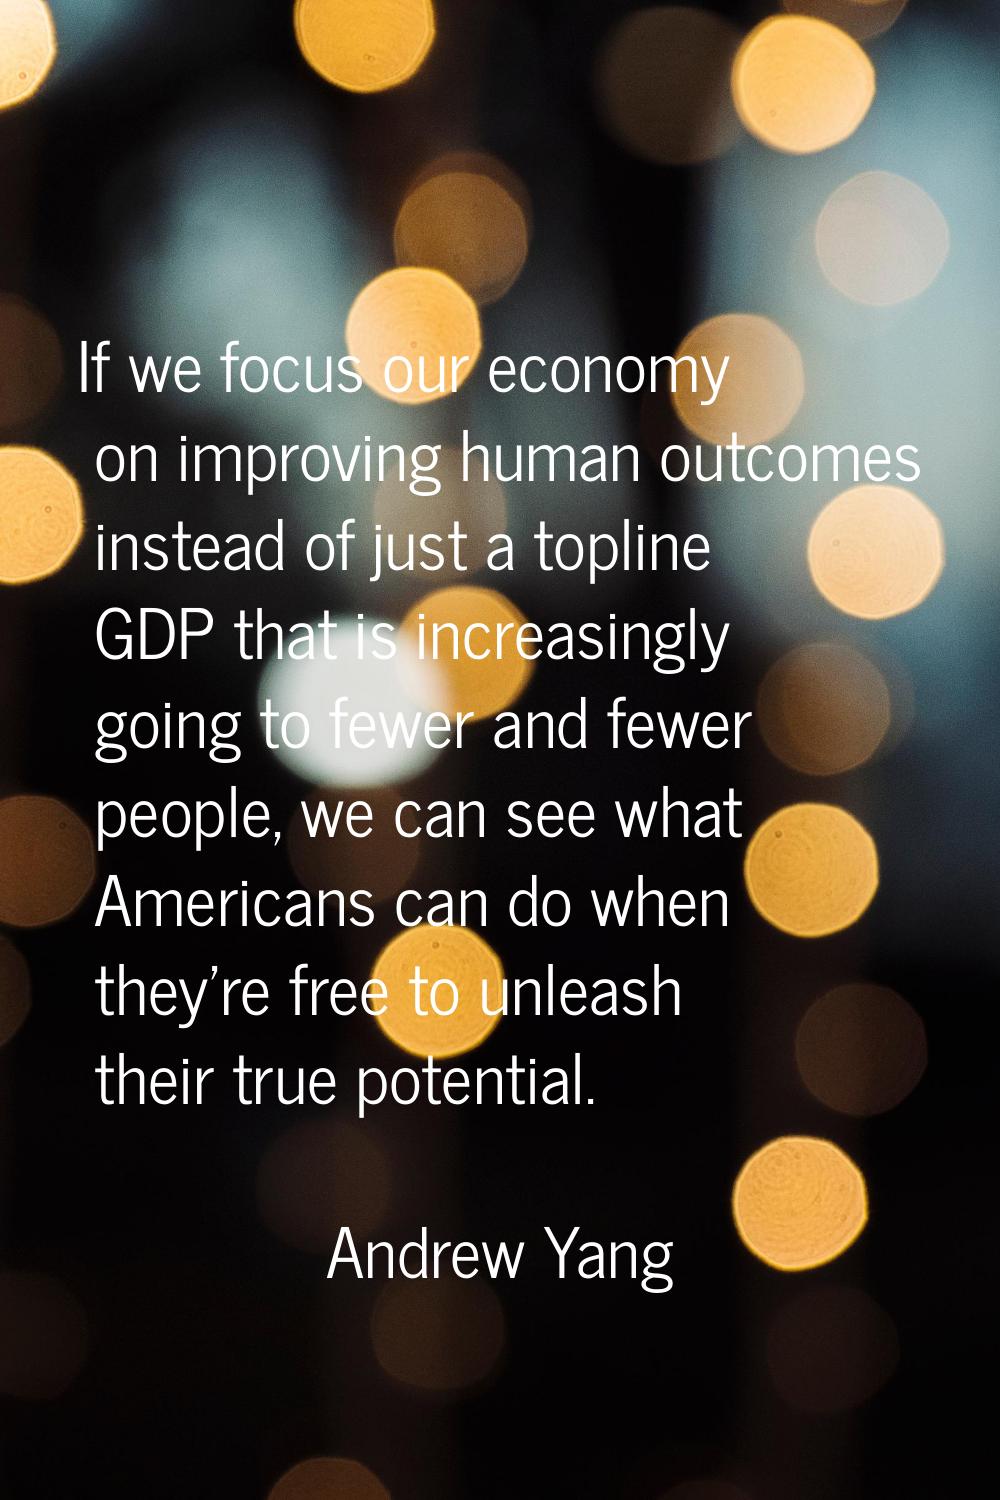 If we focus our economy on improving human outcomes instead of just a topline GDP that is increasin